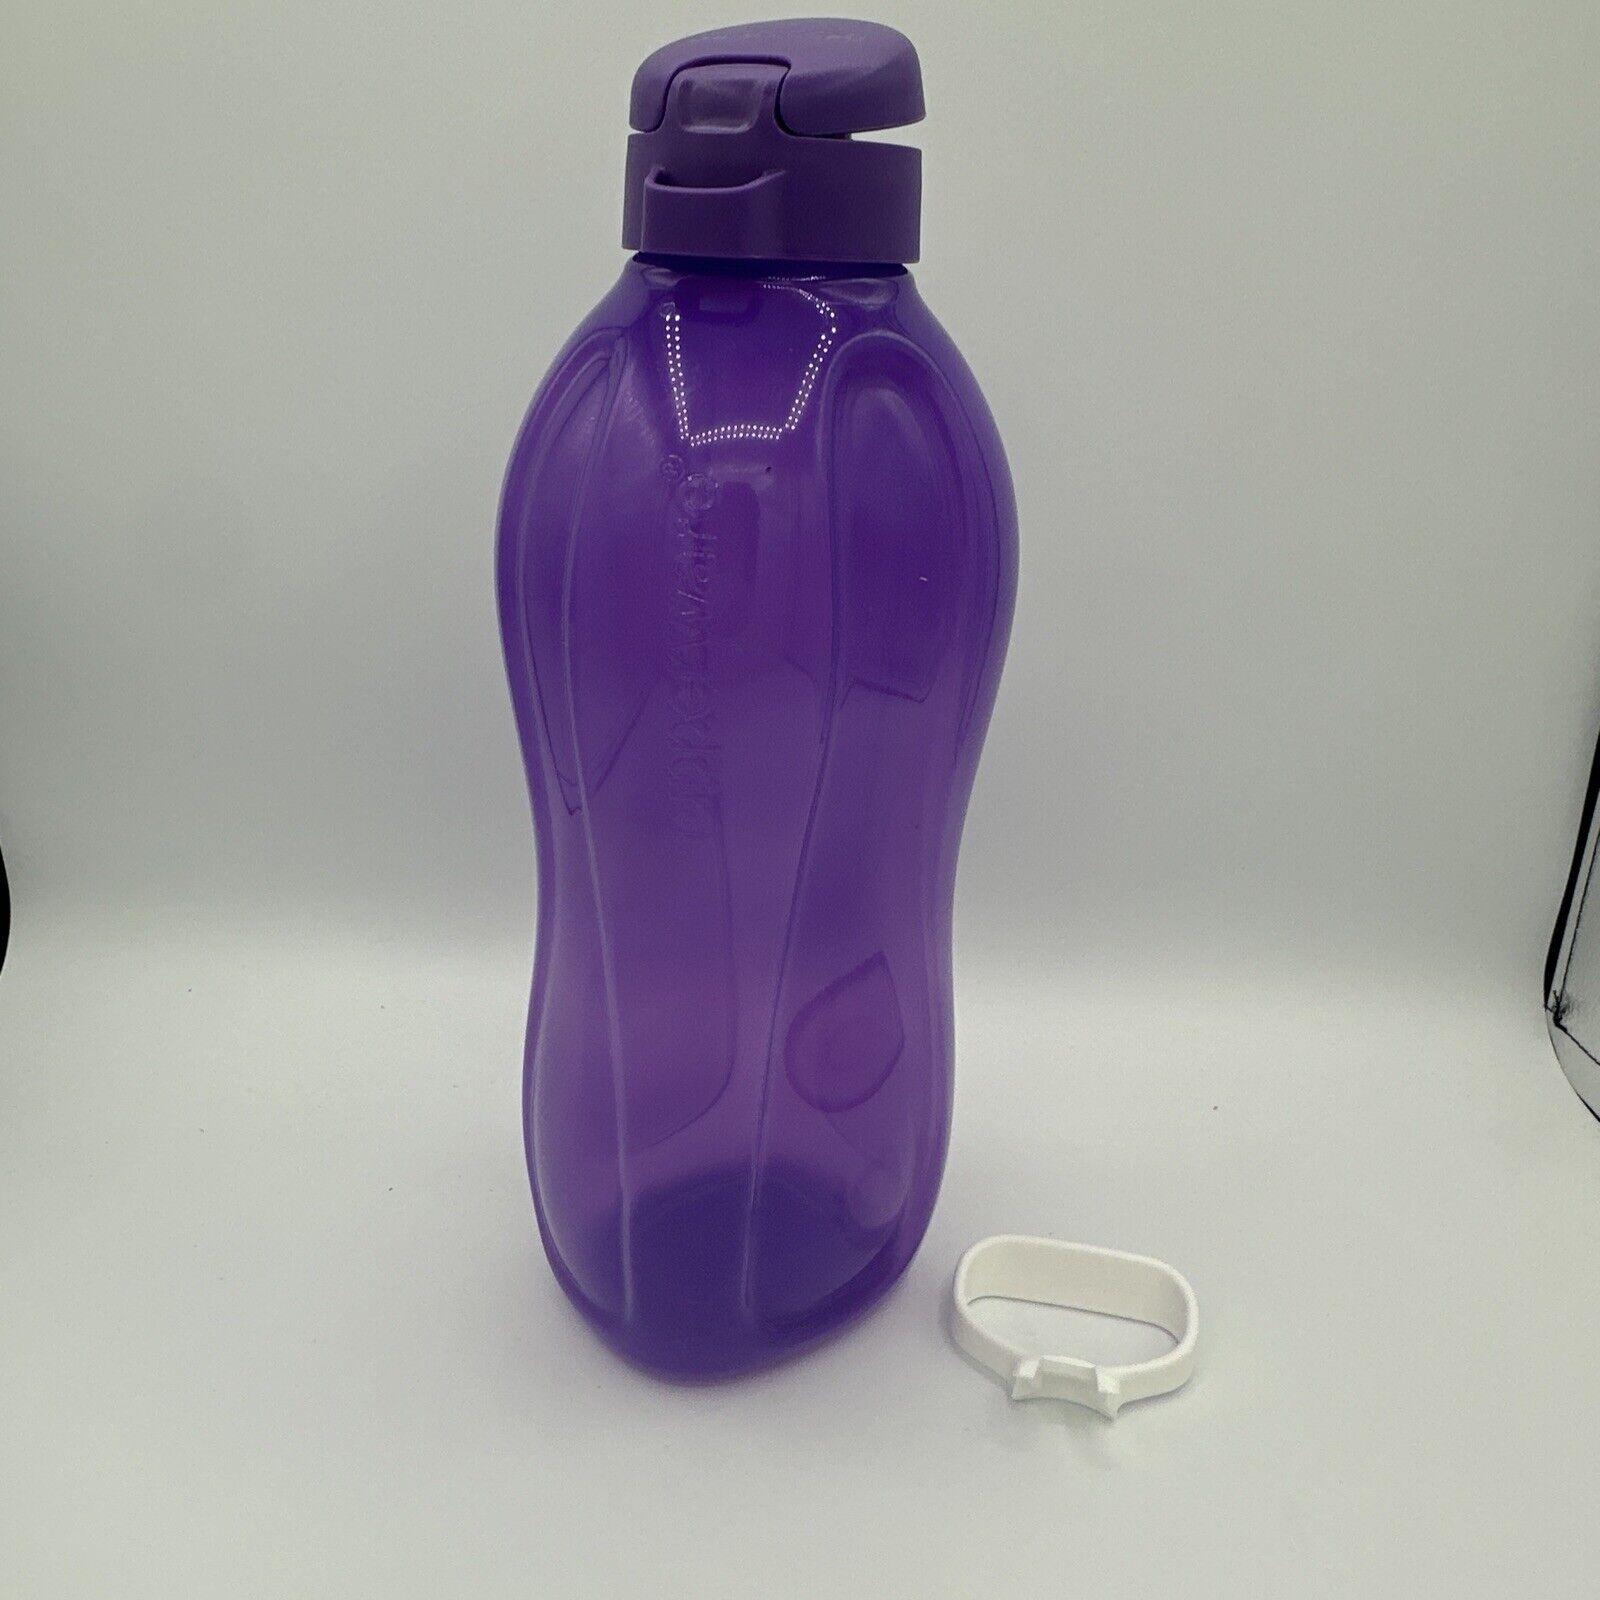 TUPPERWARE NEW EXTRA LARGE ECO BOTTLE WATER 2 L/ 64 OZ- Purple- new